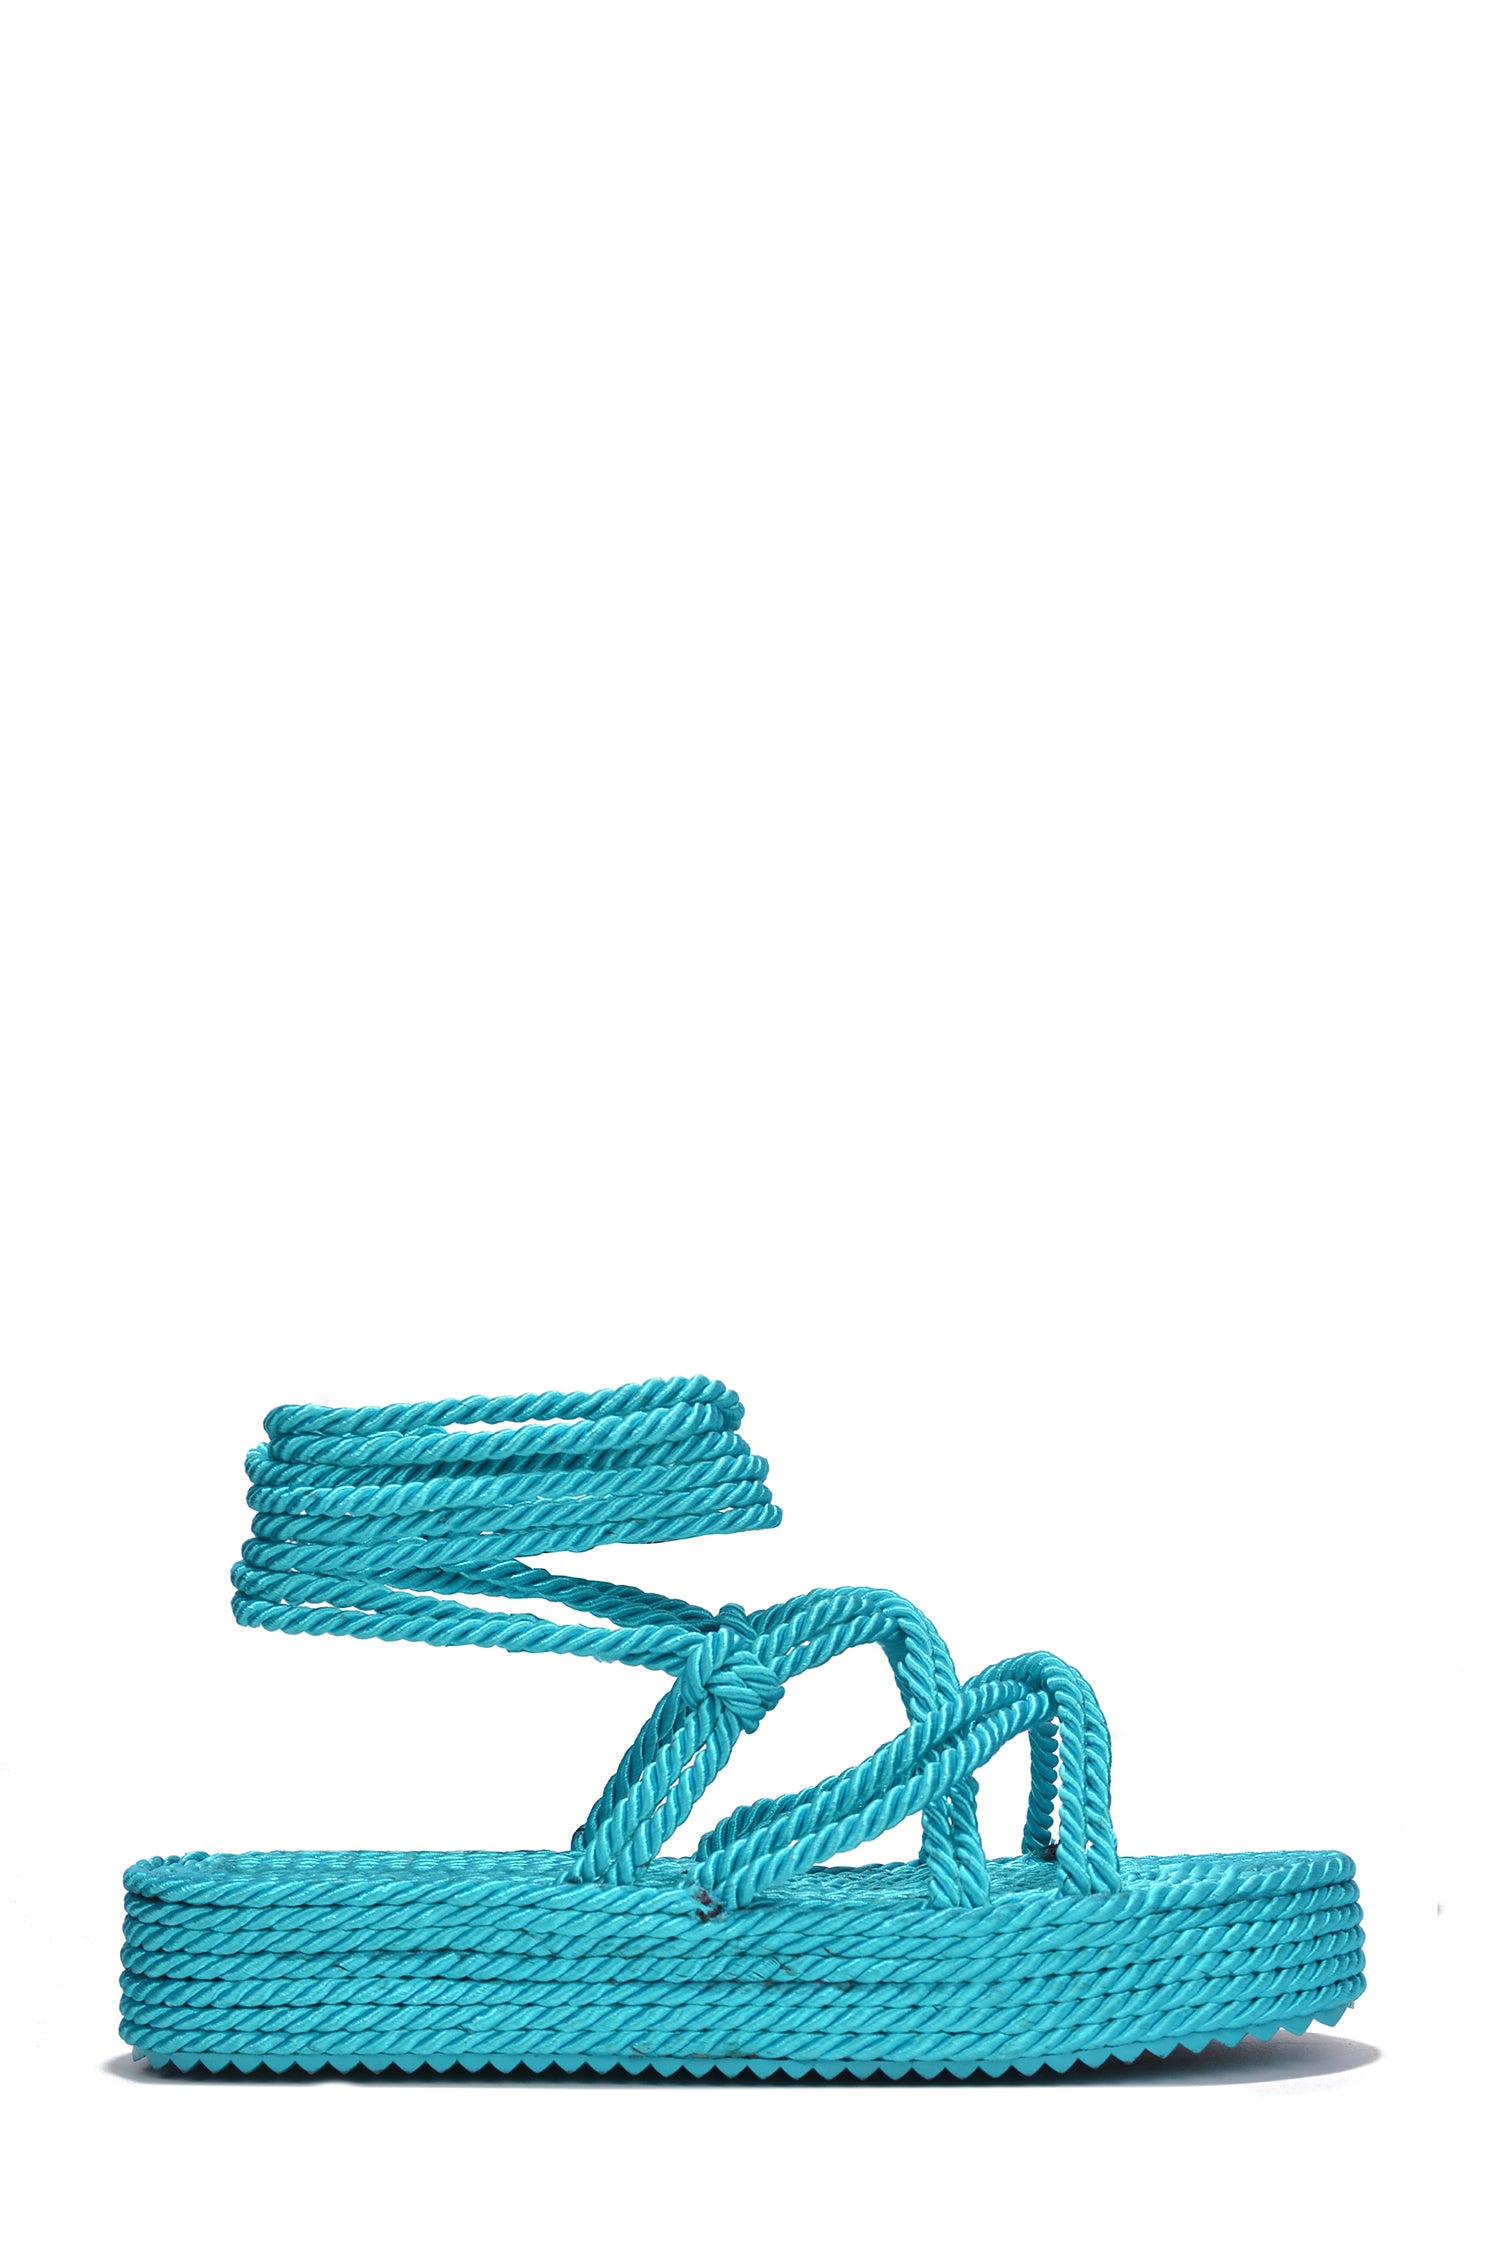 UrbanOG - Racto Strappy Lace Up Round Toe Sandals - SANDALS